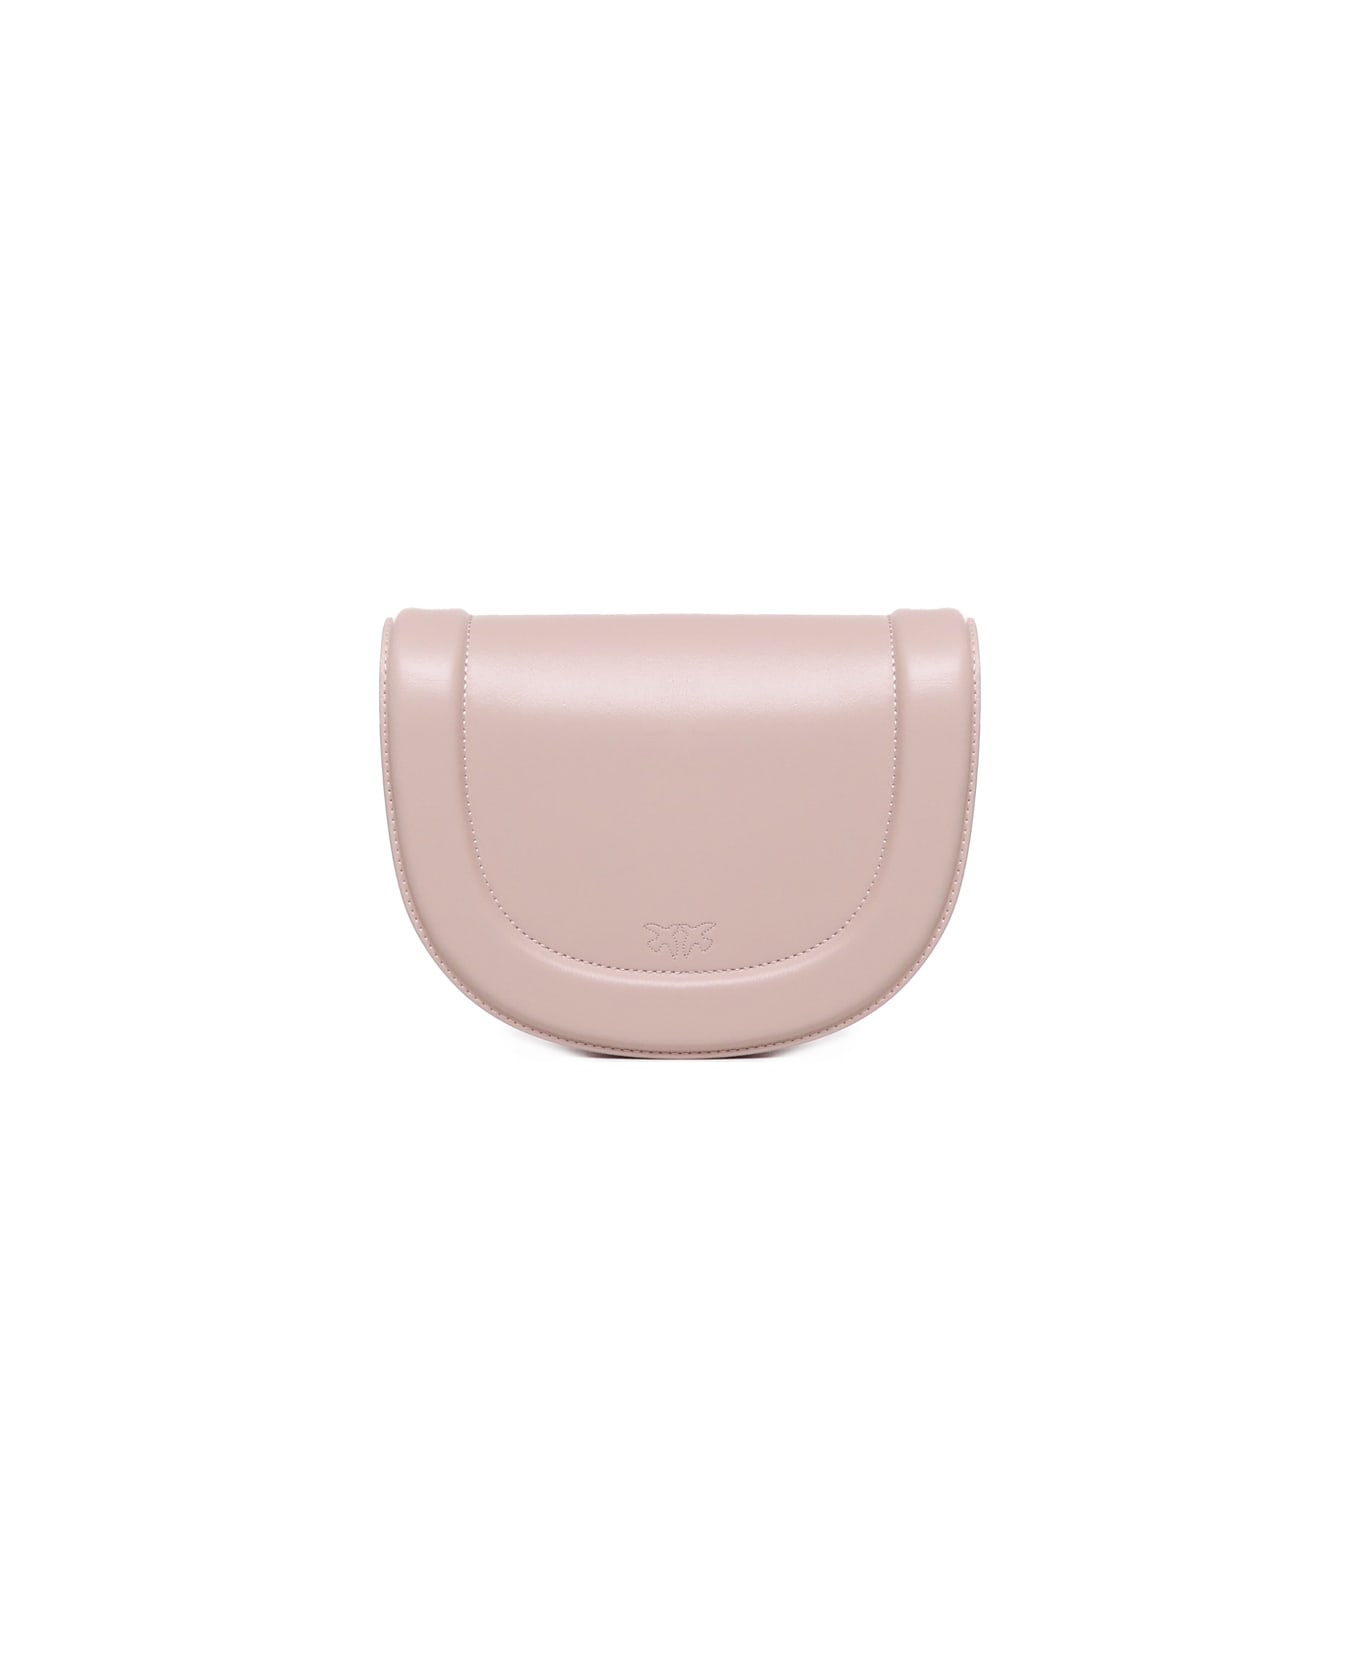 Pinko Love Bag Click Round Leather Bag - Pink トートバッグ